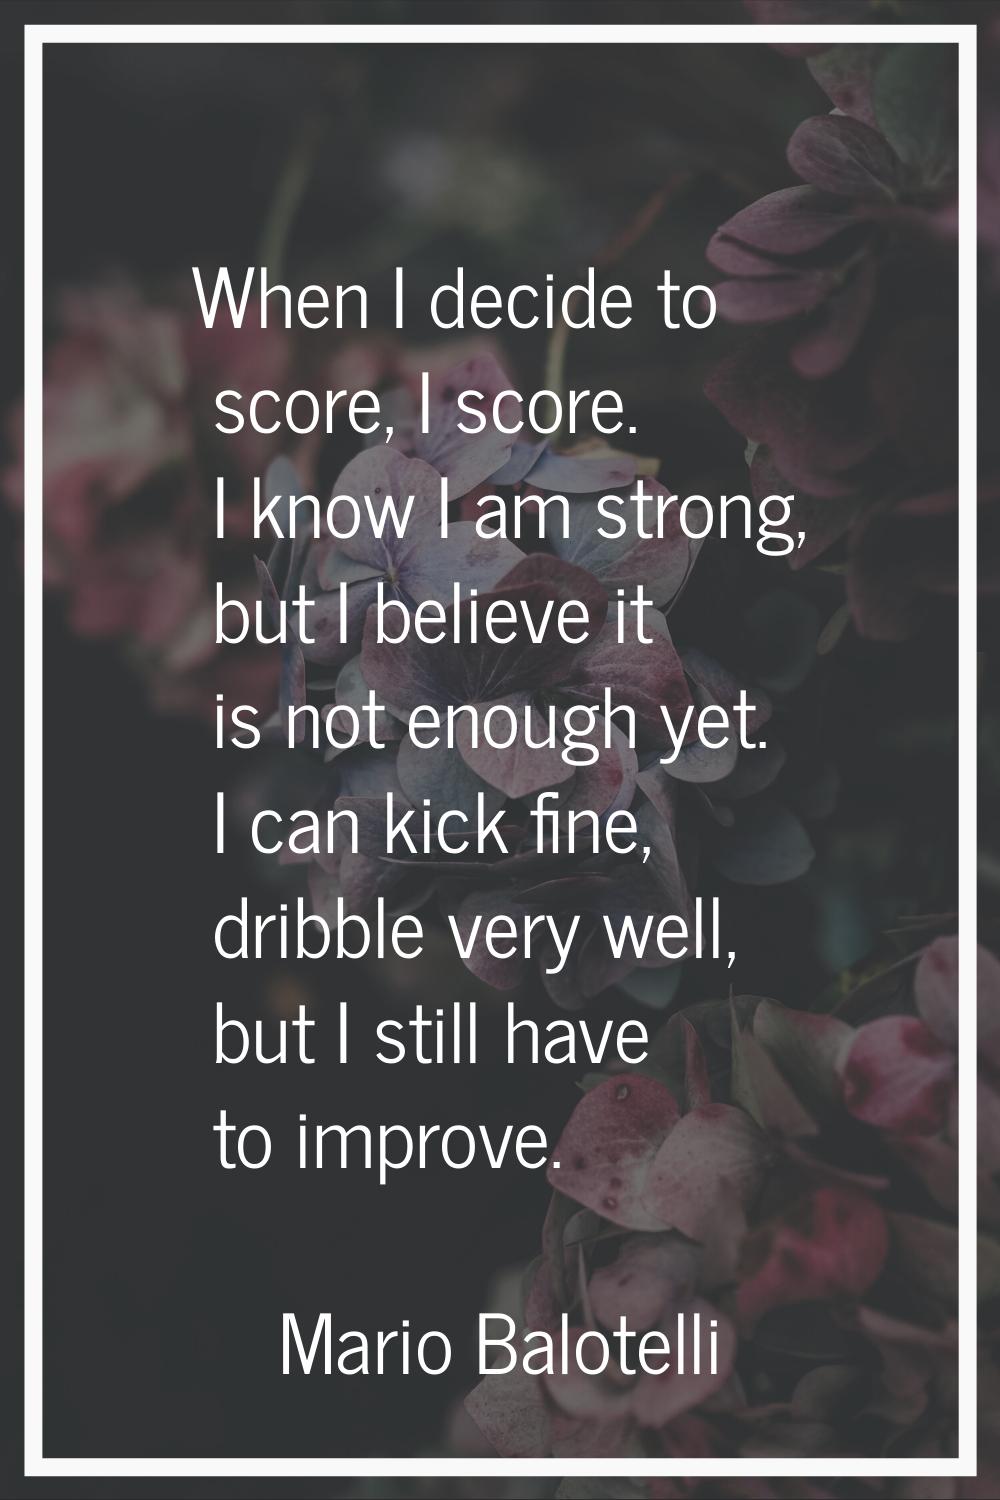 When I decide to score, I score. I know I am strong, but I believe it is not enough yet. I can kick